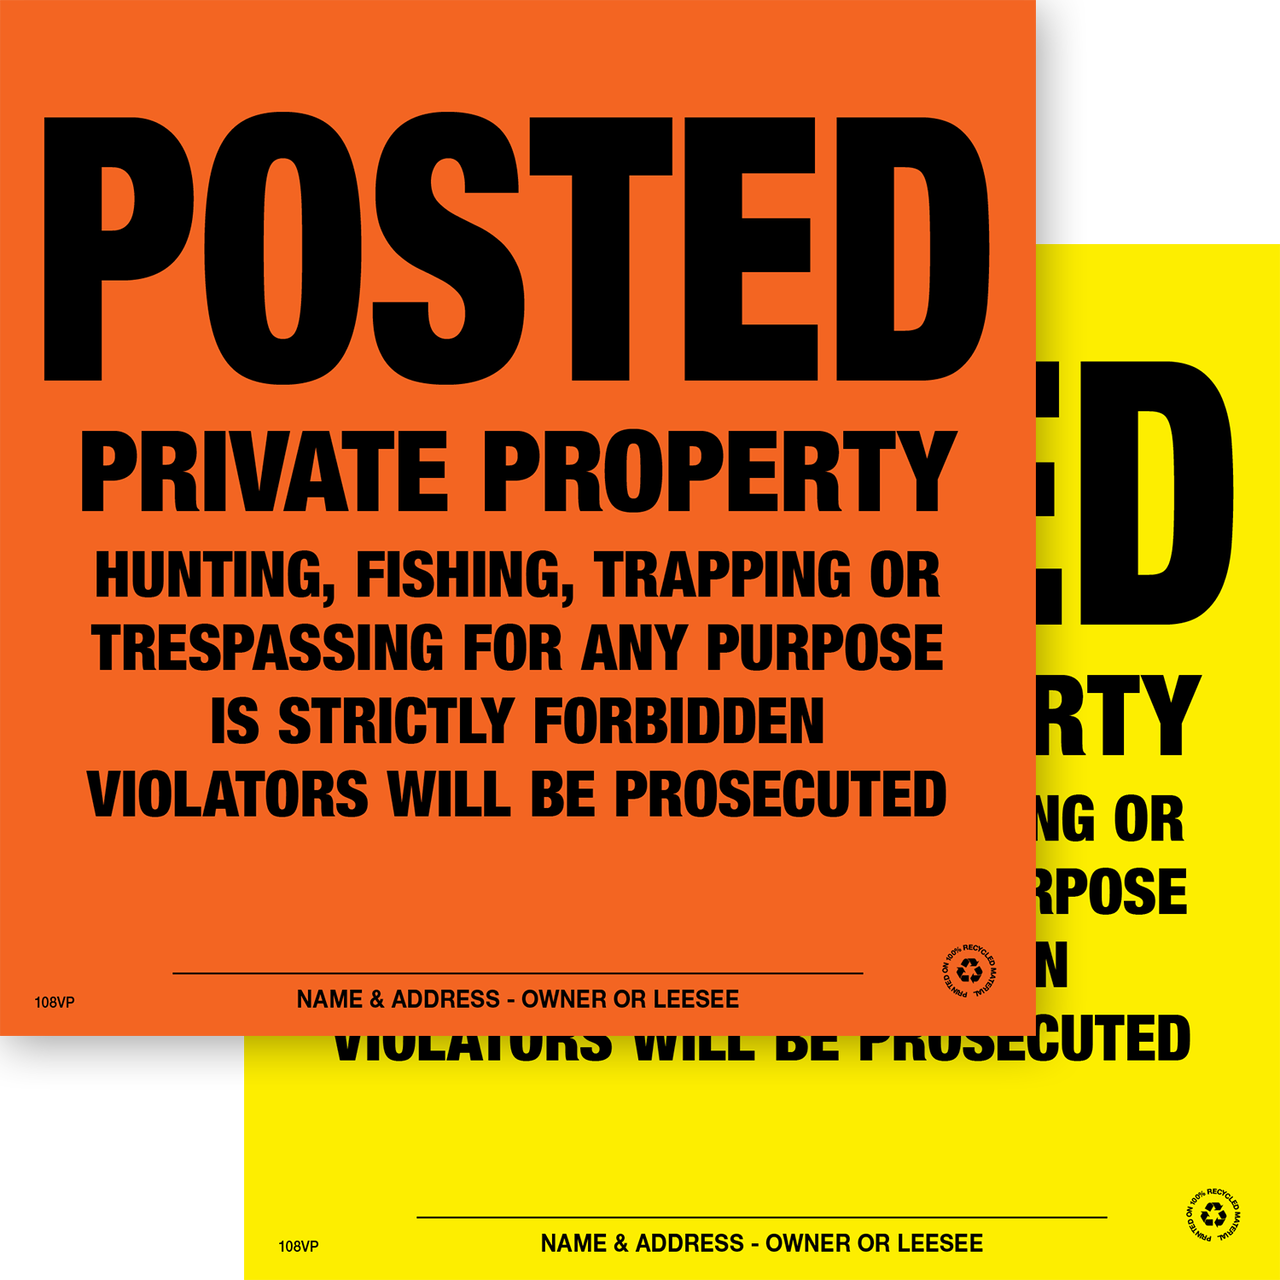 Posted Private Property Posted Signs - Orange or Yellow Aluminum - Pack of 25